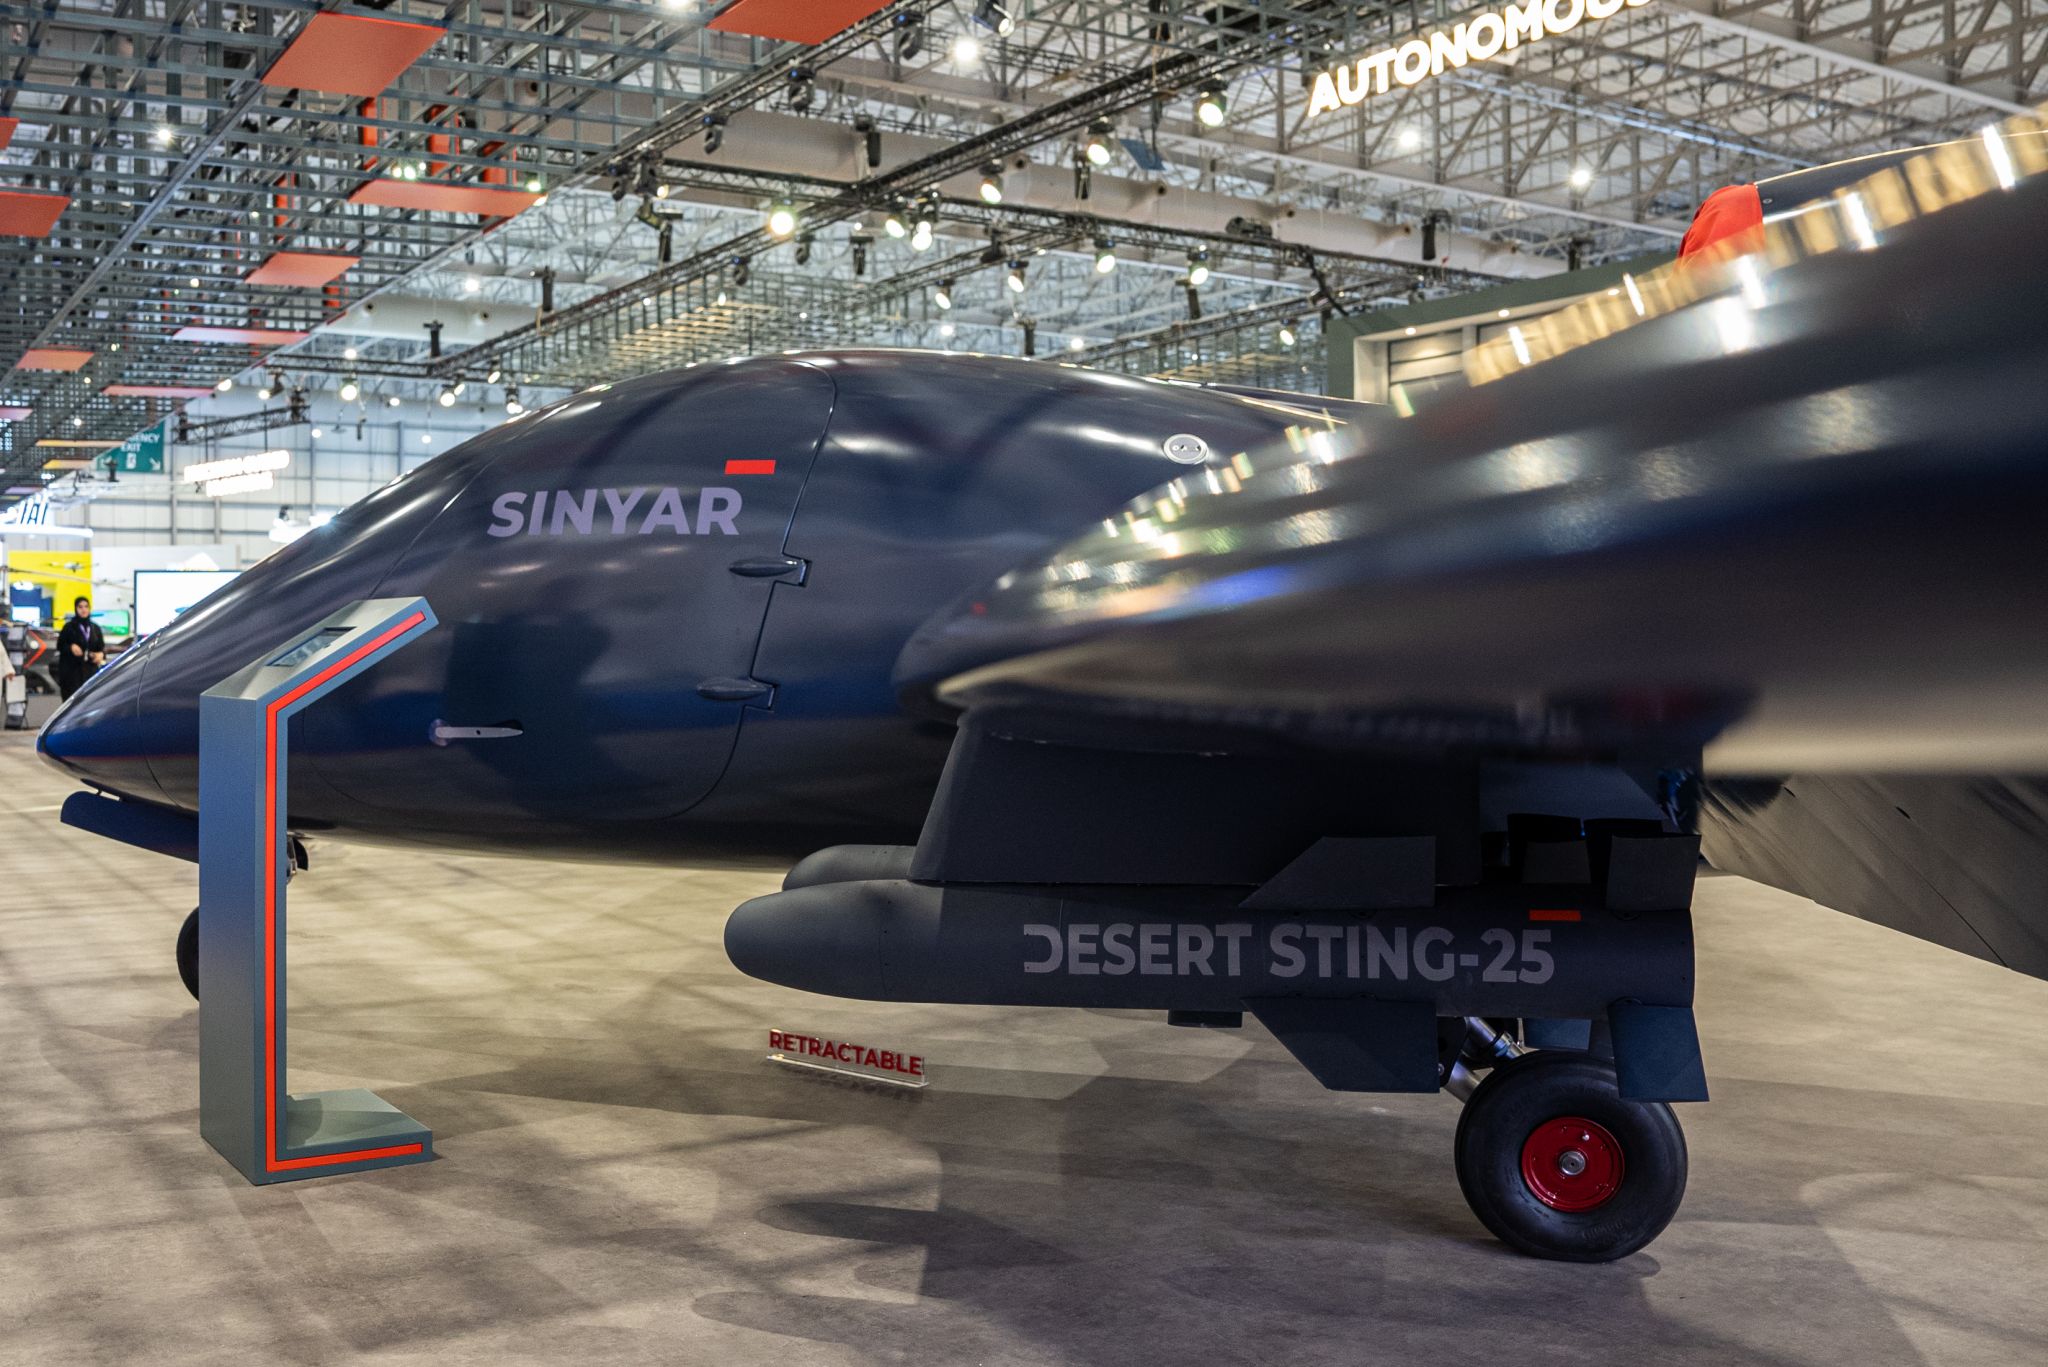 Edge Group Unveils Sinyar Jet-powered Unmanned Aircraft at Dubai Airshow 2023